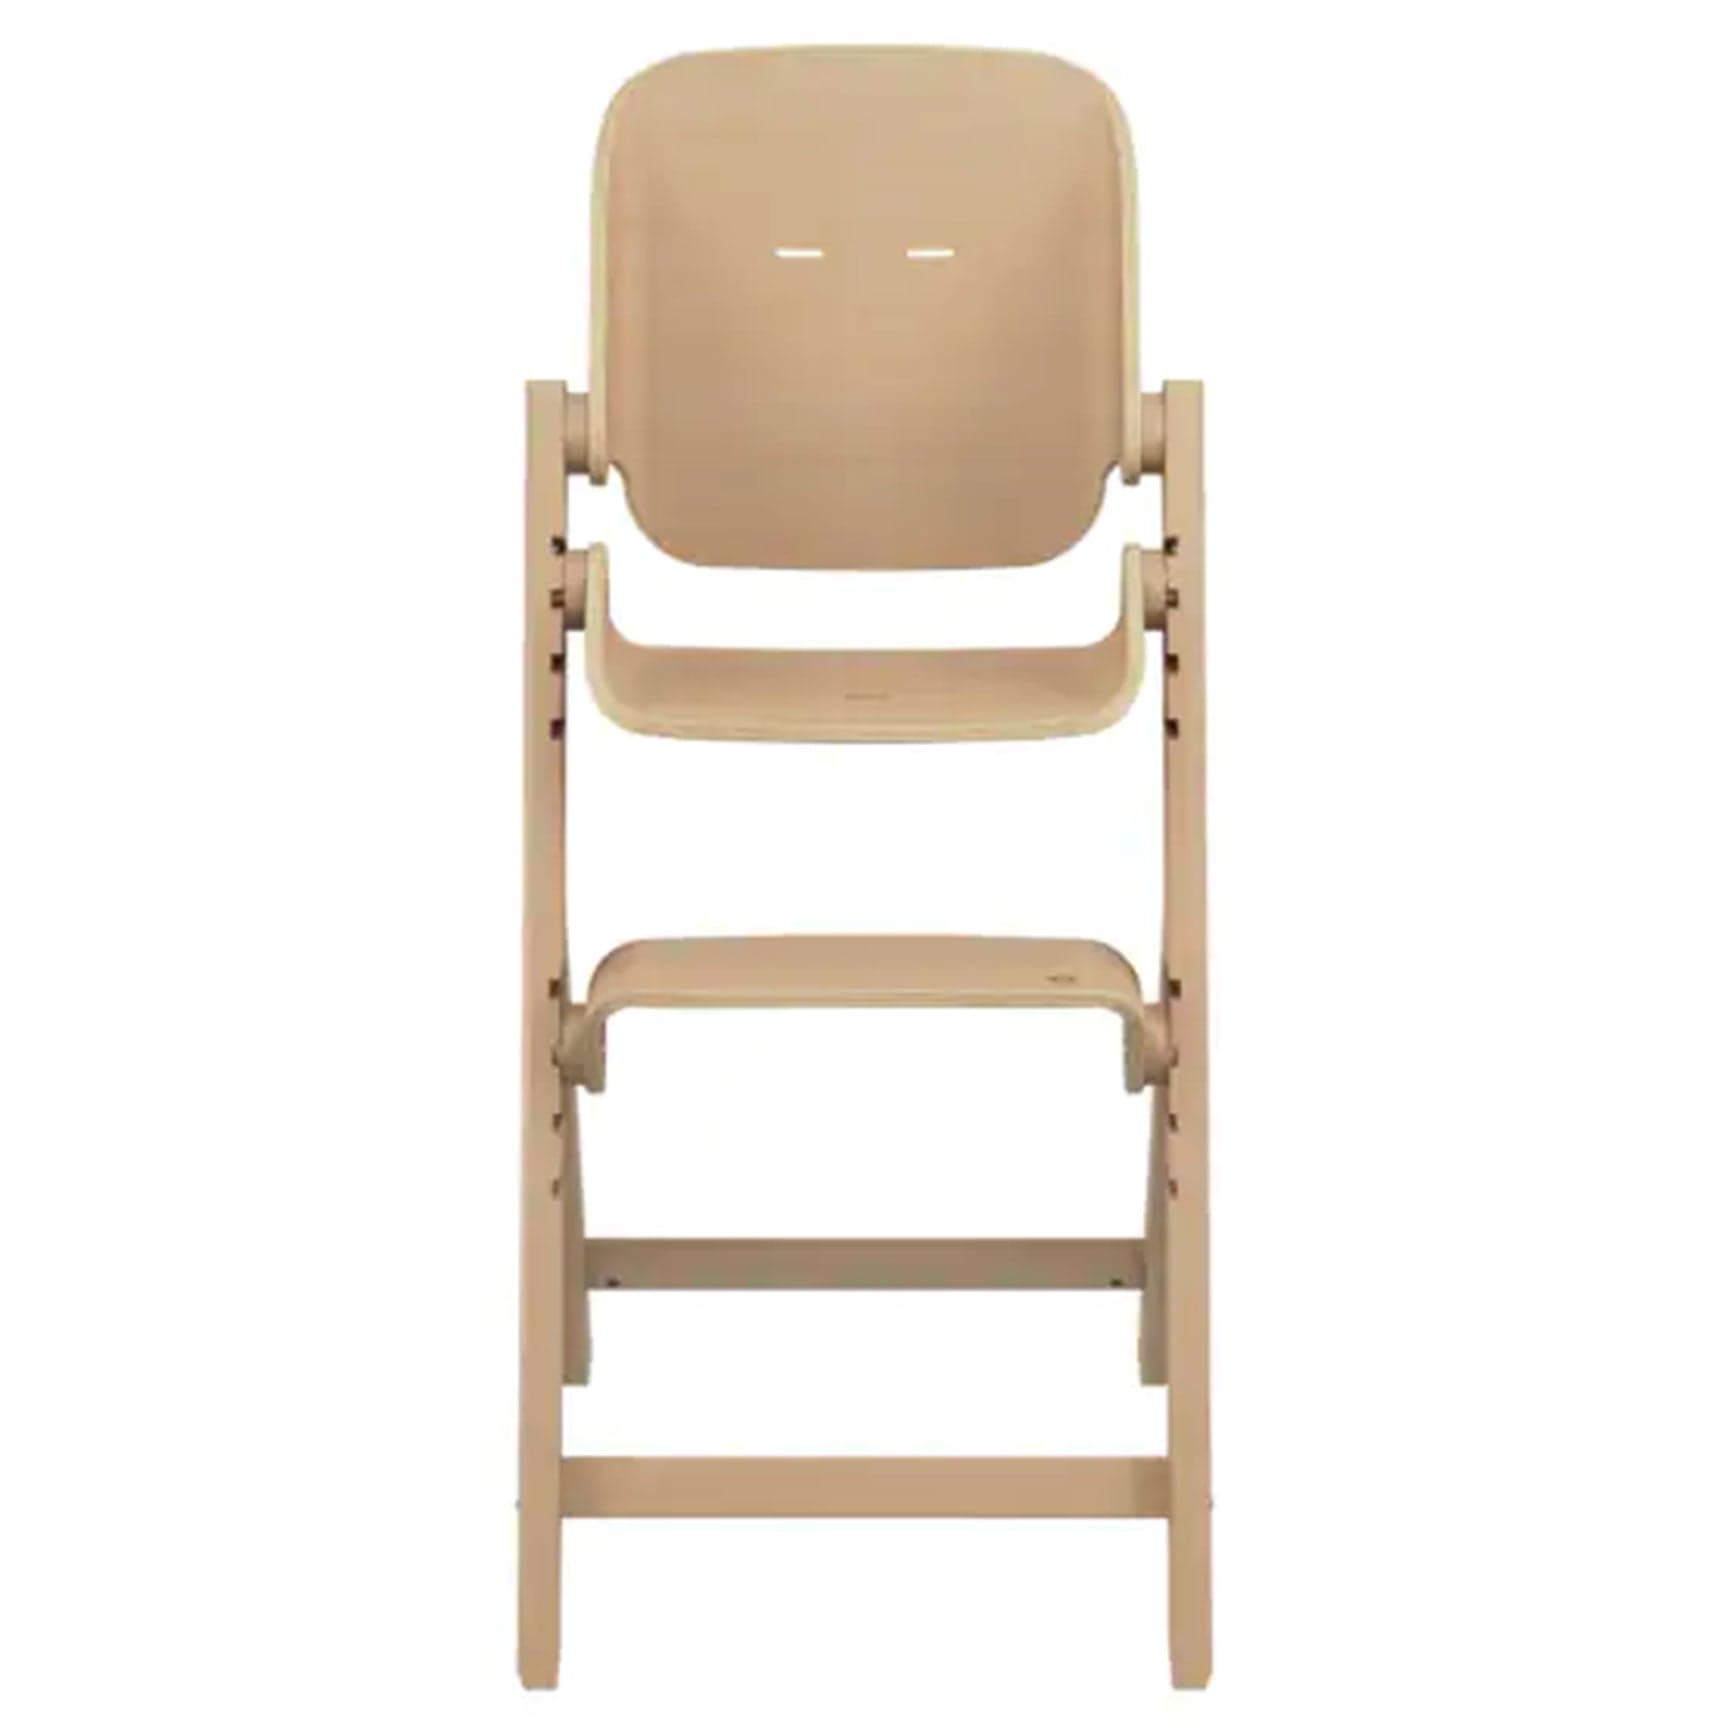 Maxi-Cosi Nesta Highchair in Natural Baby Highchairs 2719014110 3220660340361